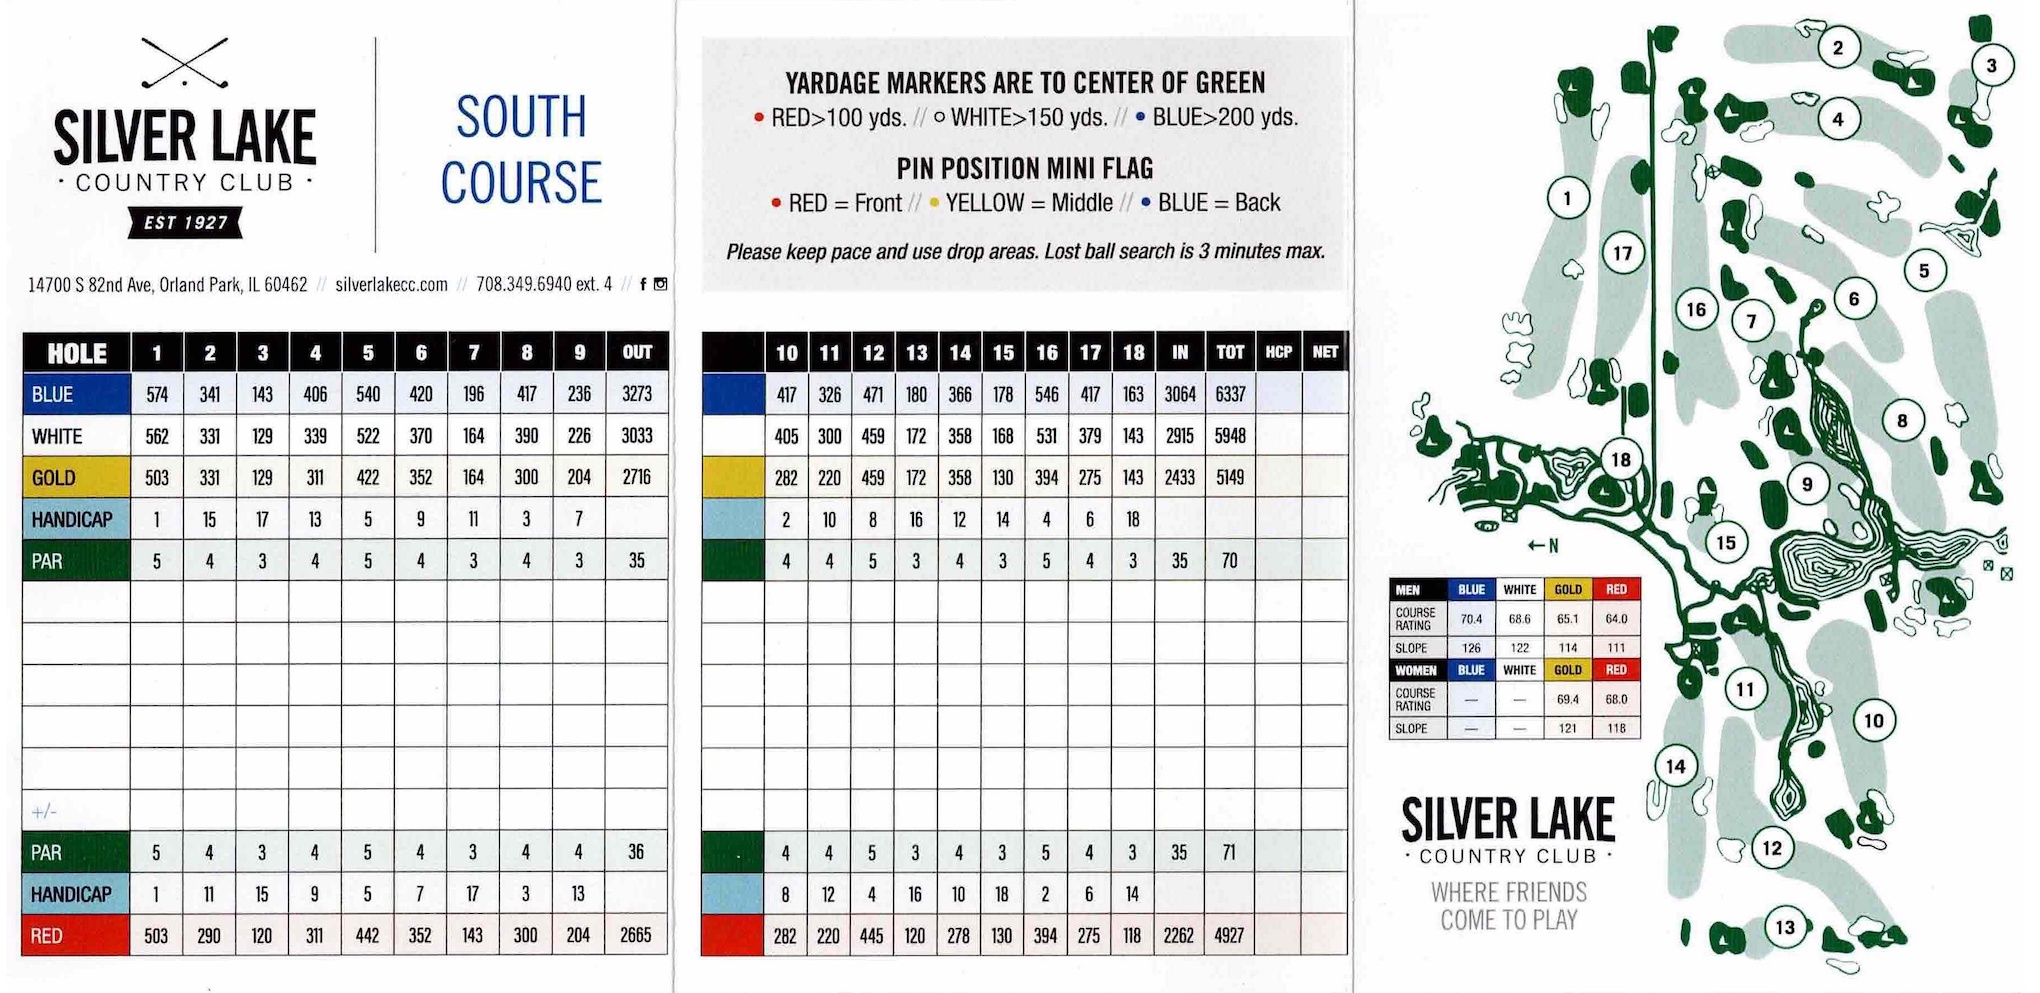 Scan of the scorecard from Silver Lake South Course in Orland Park, Illinois. 